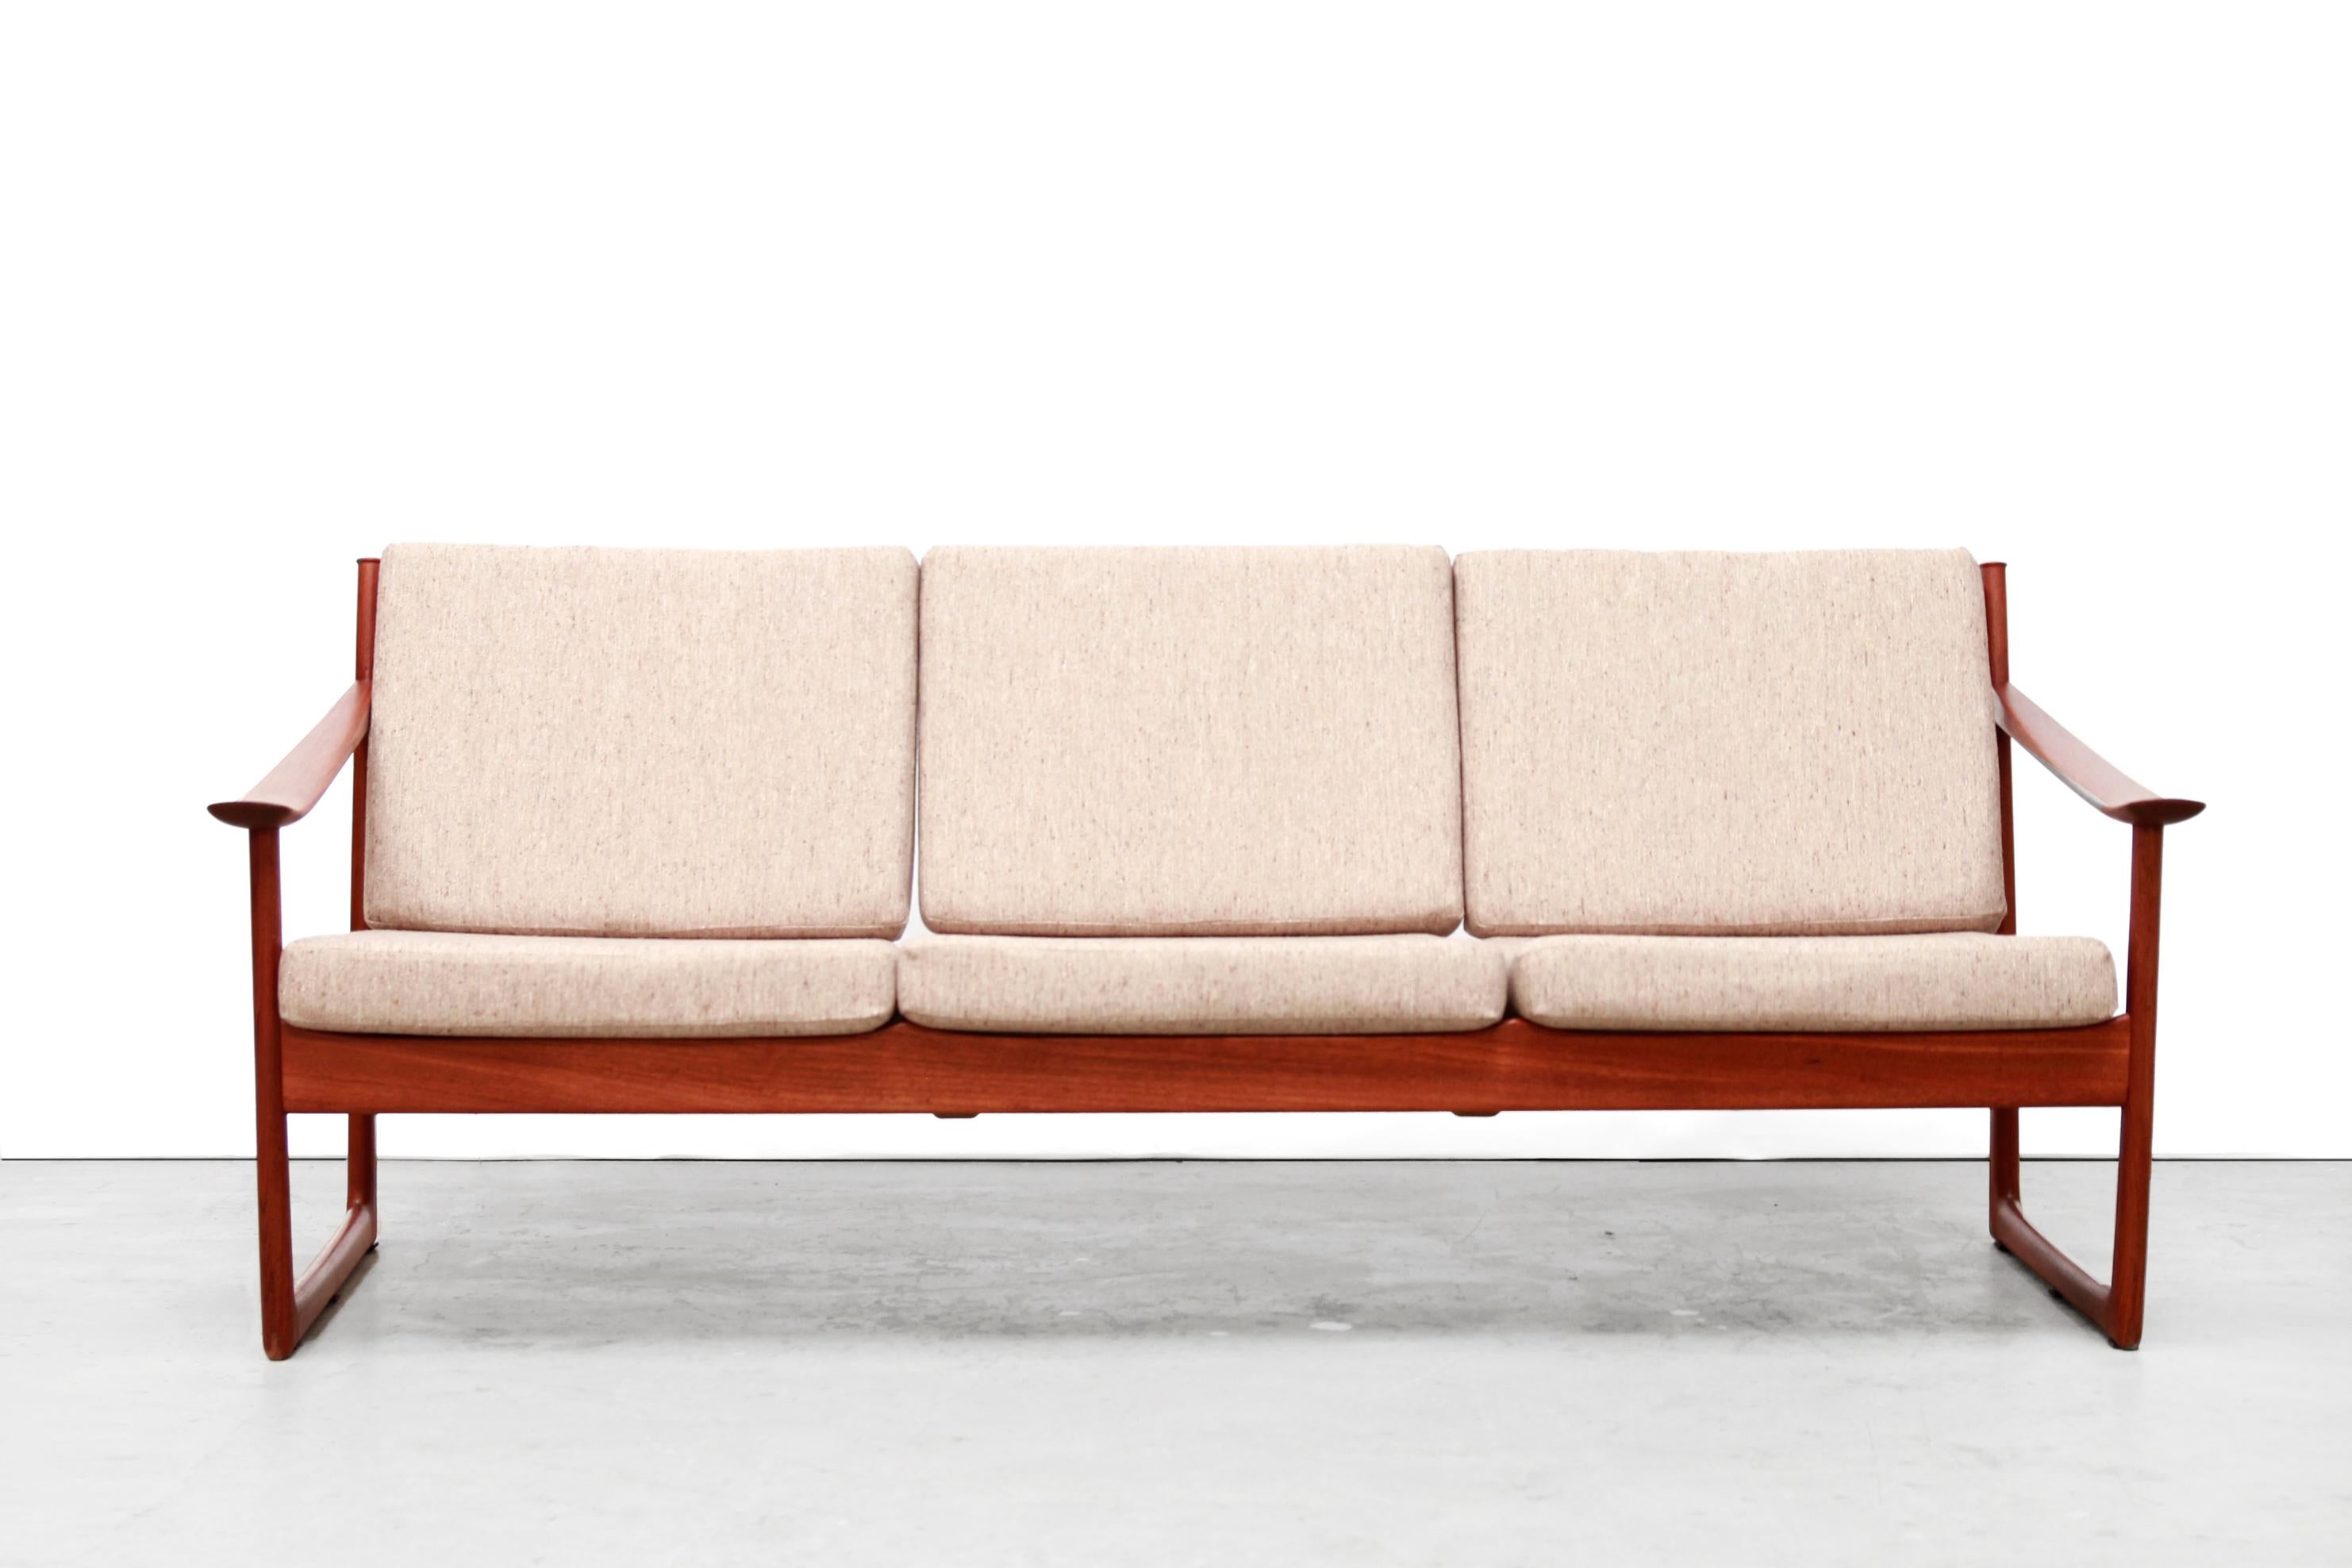 Beautiful three-seat sofa designed by the Danish duo Peter Hvidt and Orla Molgaard Nielsen in the 1960s.
This sofa has unique sled base and beautifully designed wide armrests. The sofa is made of solid teak and has new cushions and new woolen